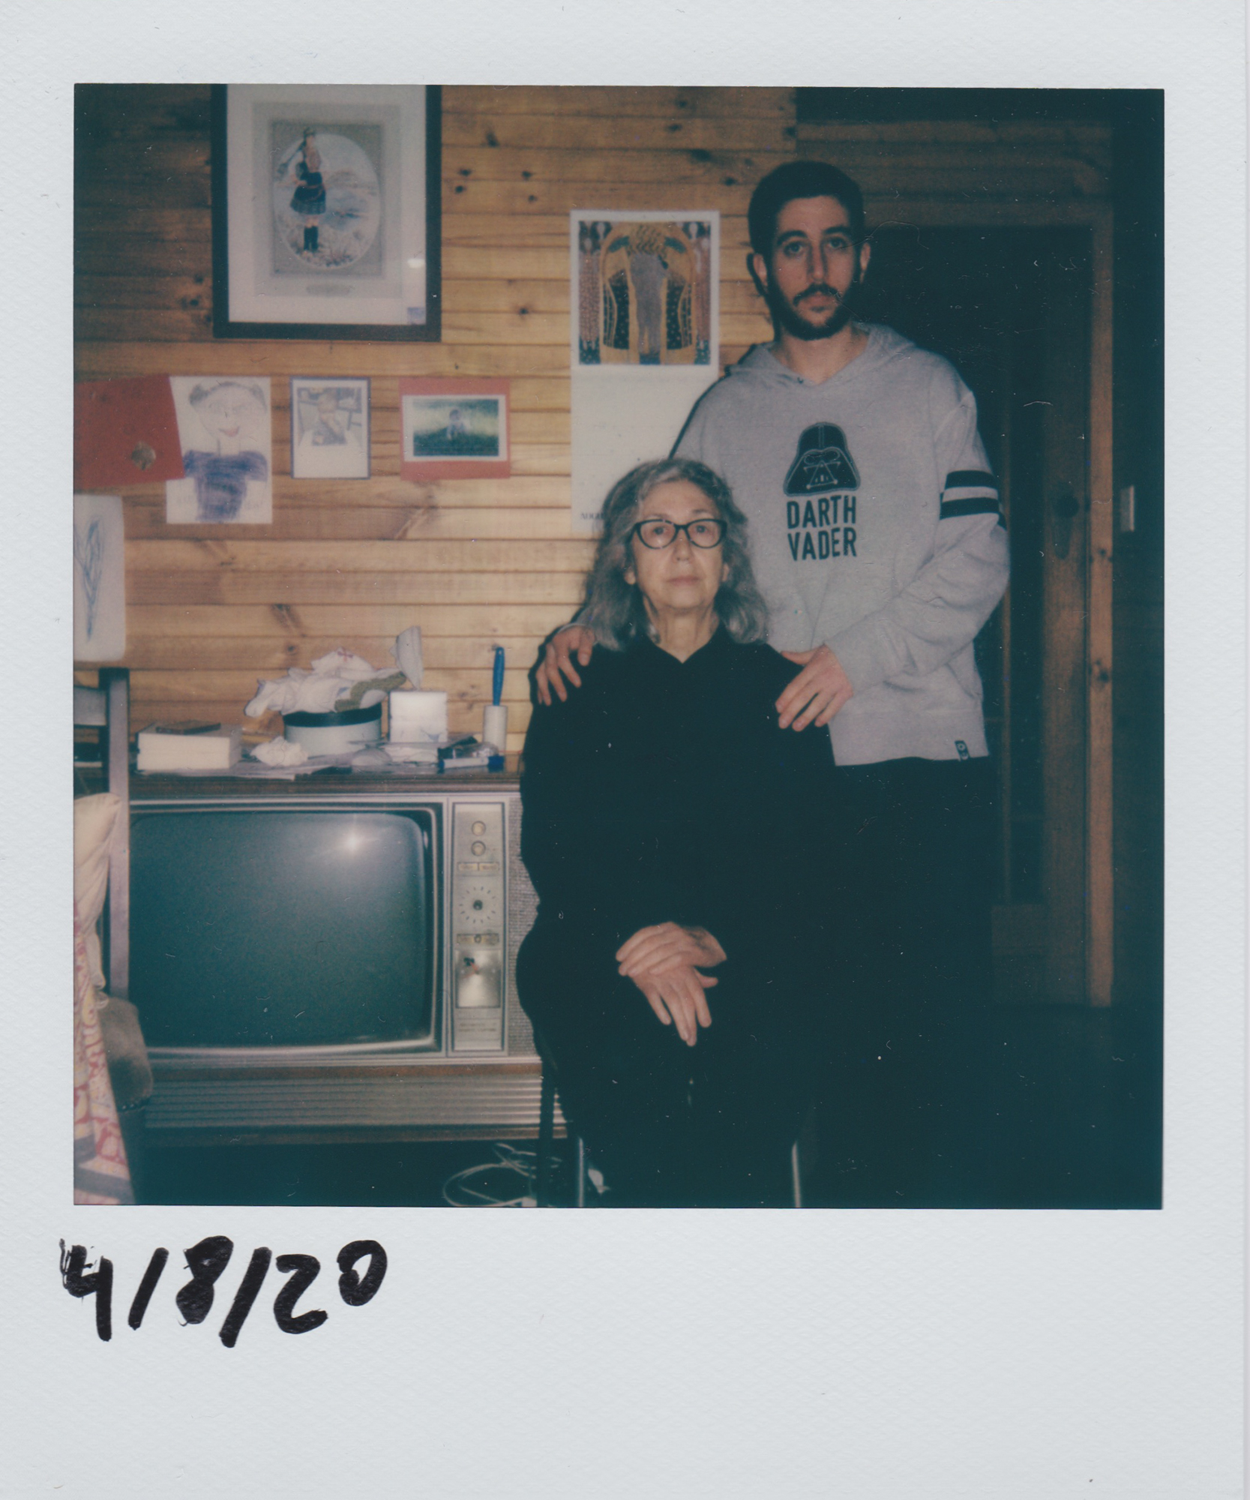 Colour polaroid of the artist and mother posed in a domestic environment. 